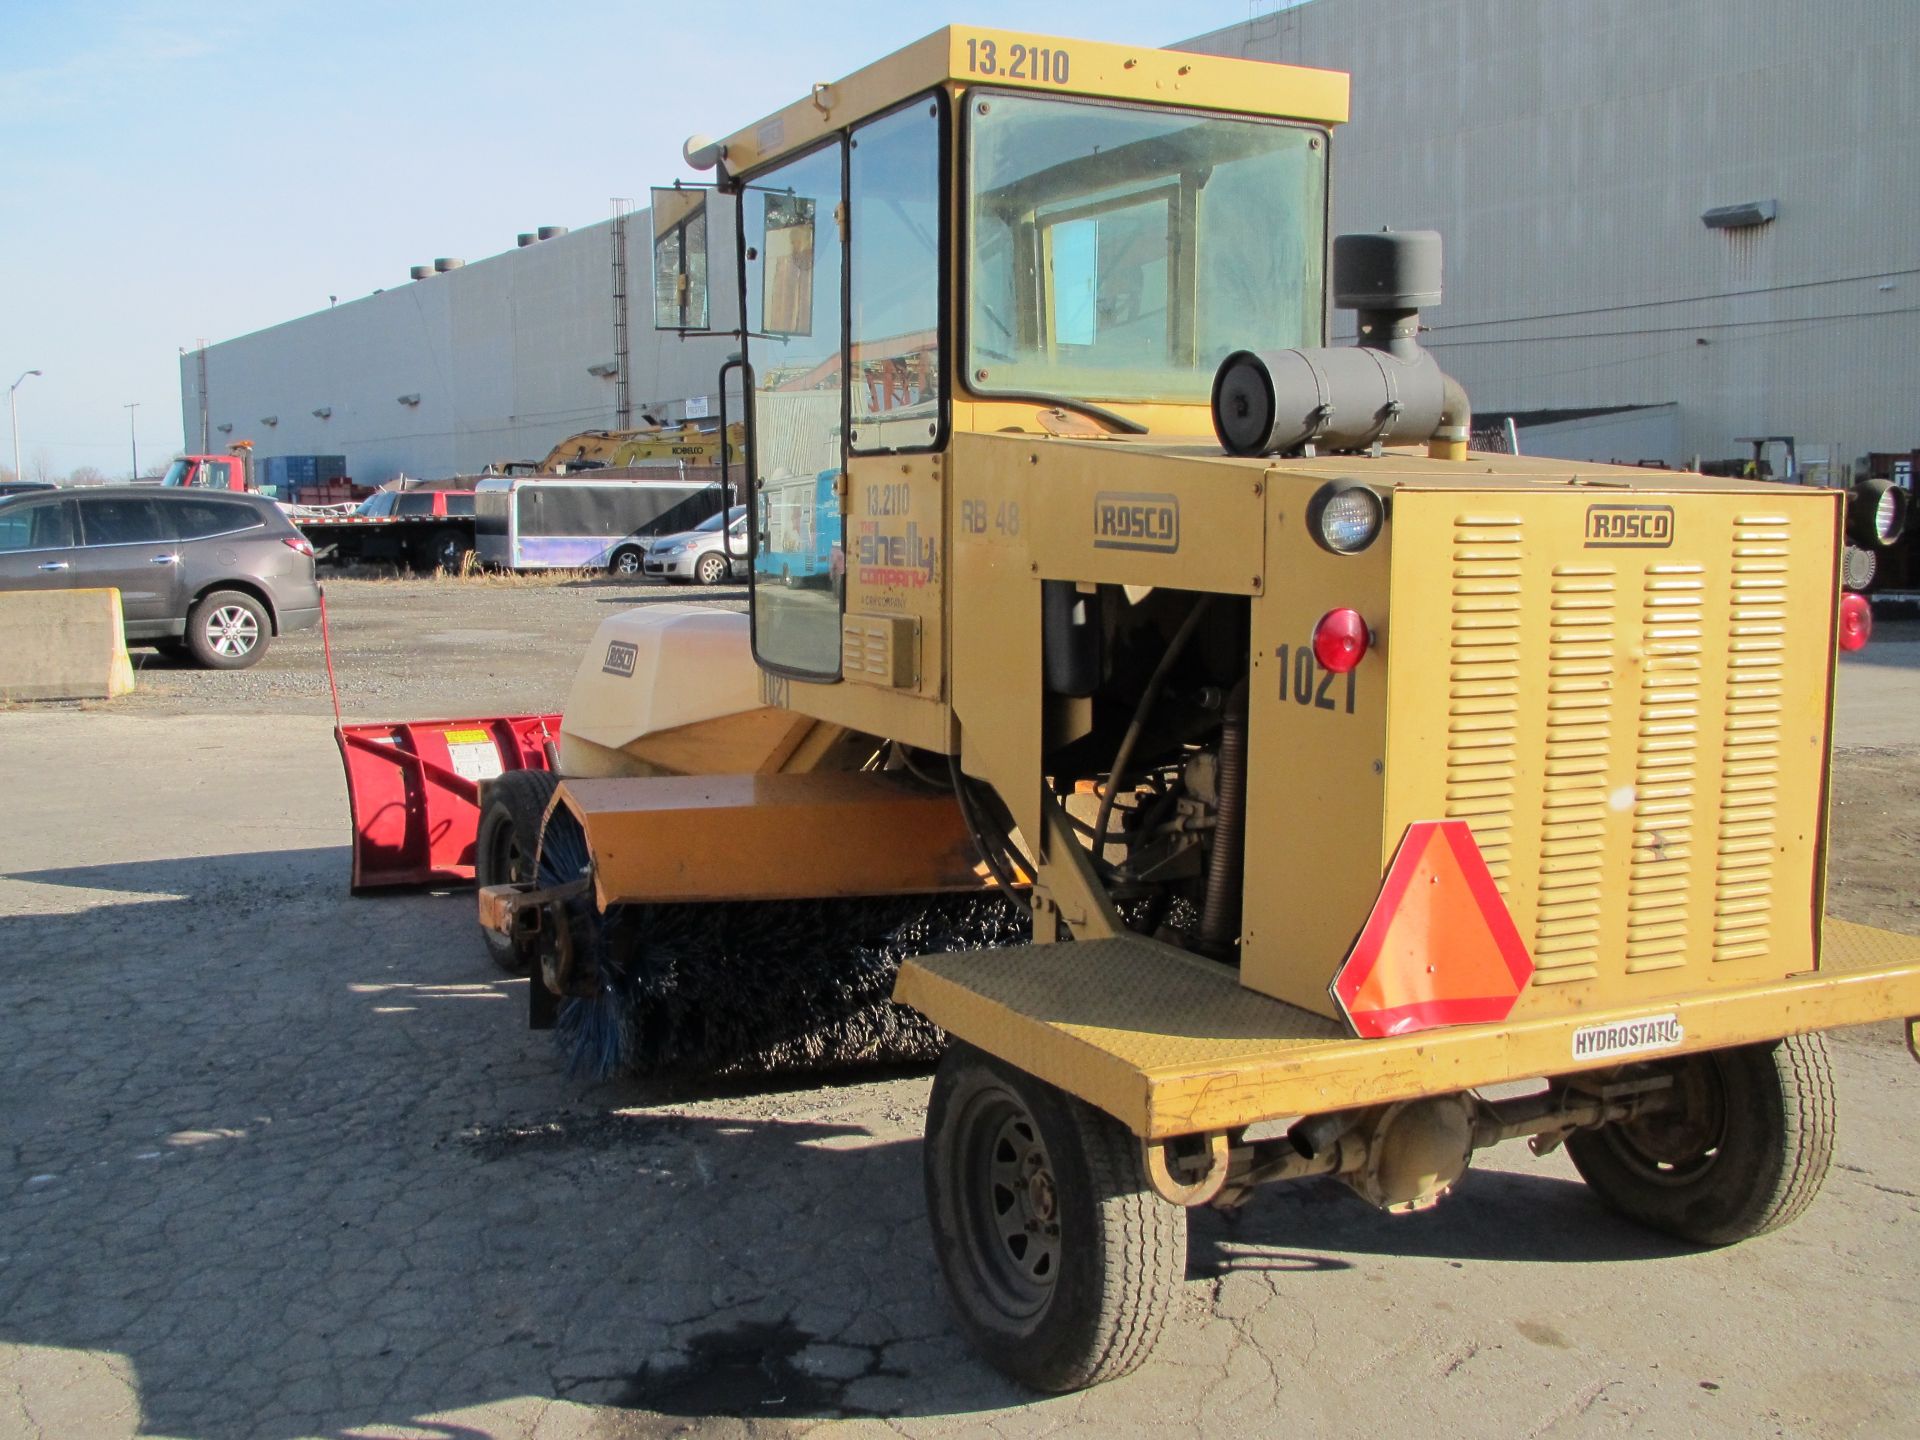 Rosco RB48 Self-Propelled Broom with snow plow - Image 7 of 14